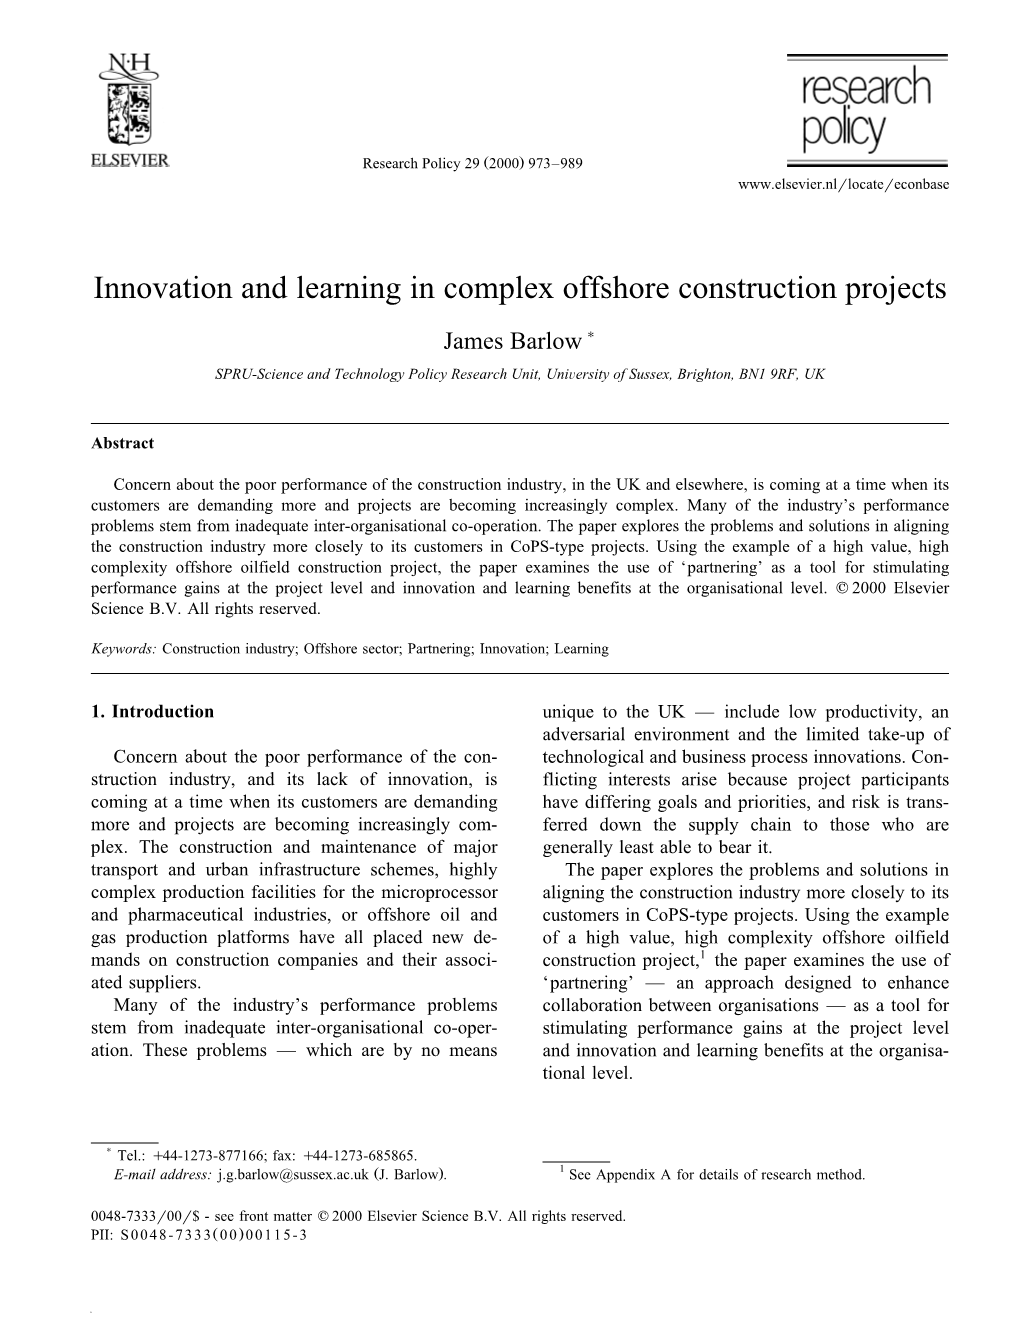 Innovation and Learning in Complex Offshore Construction Projects